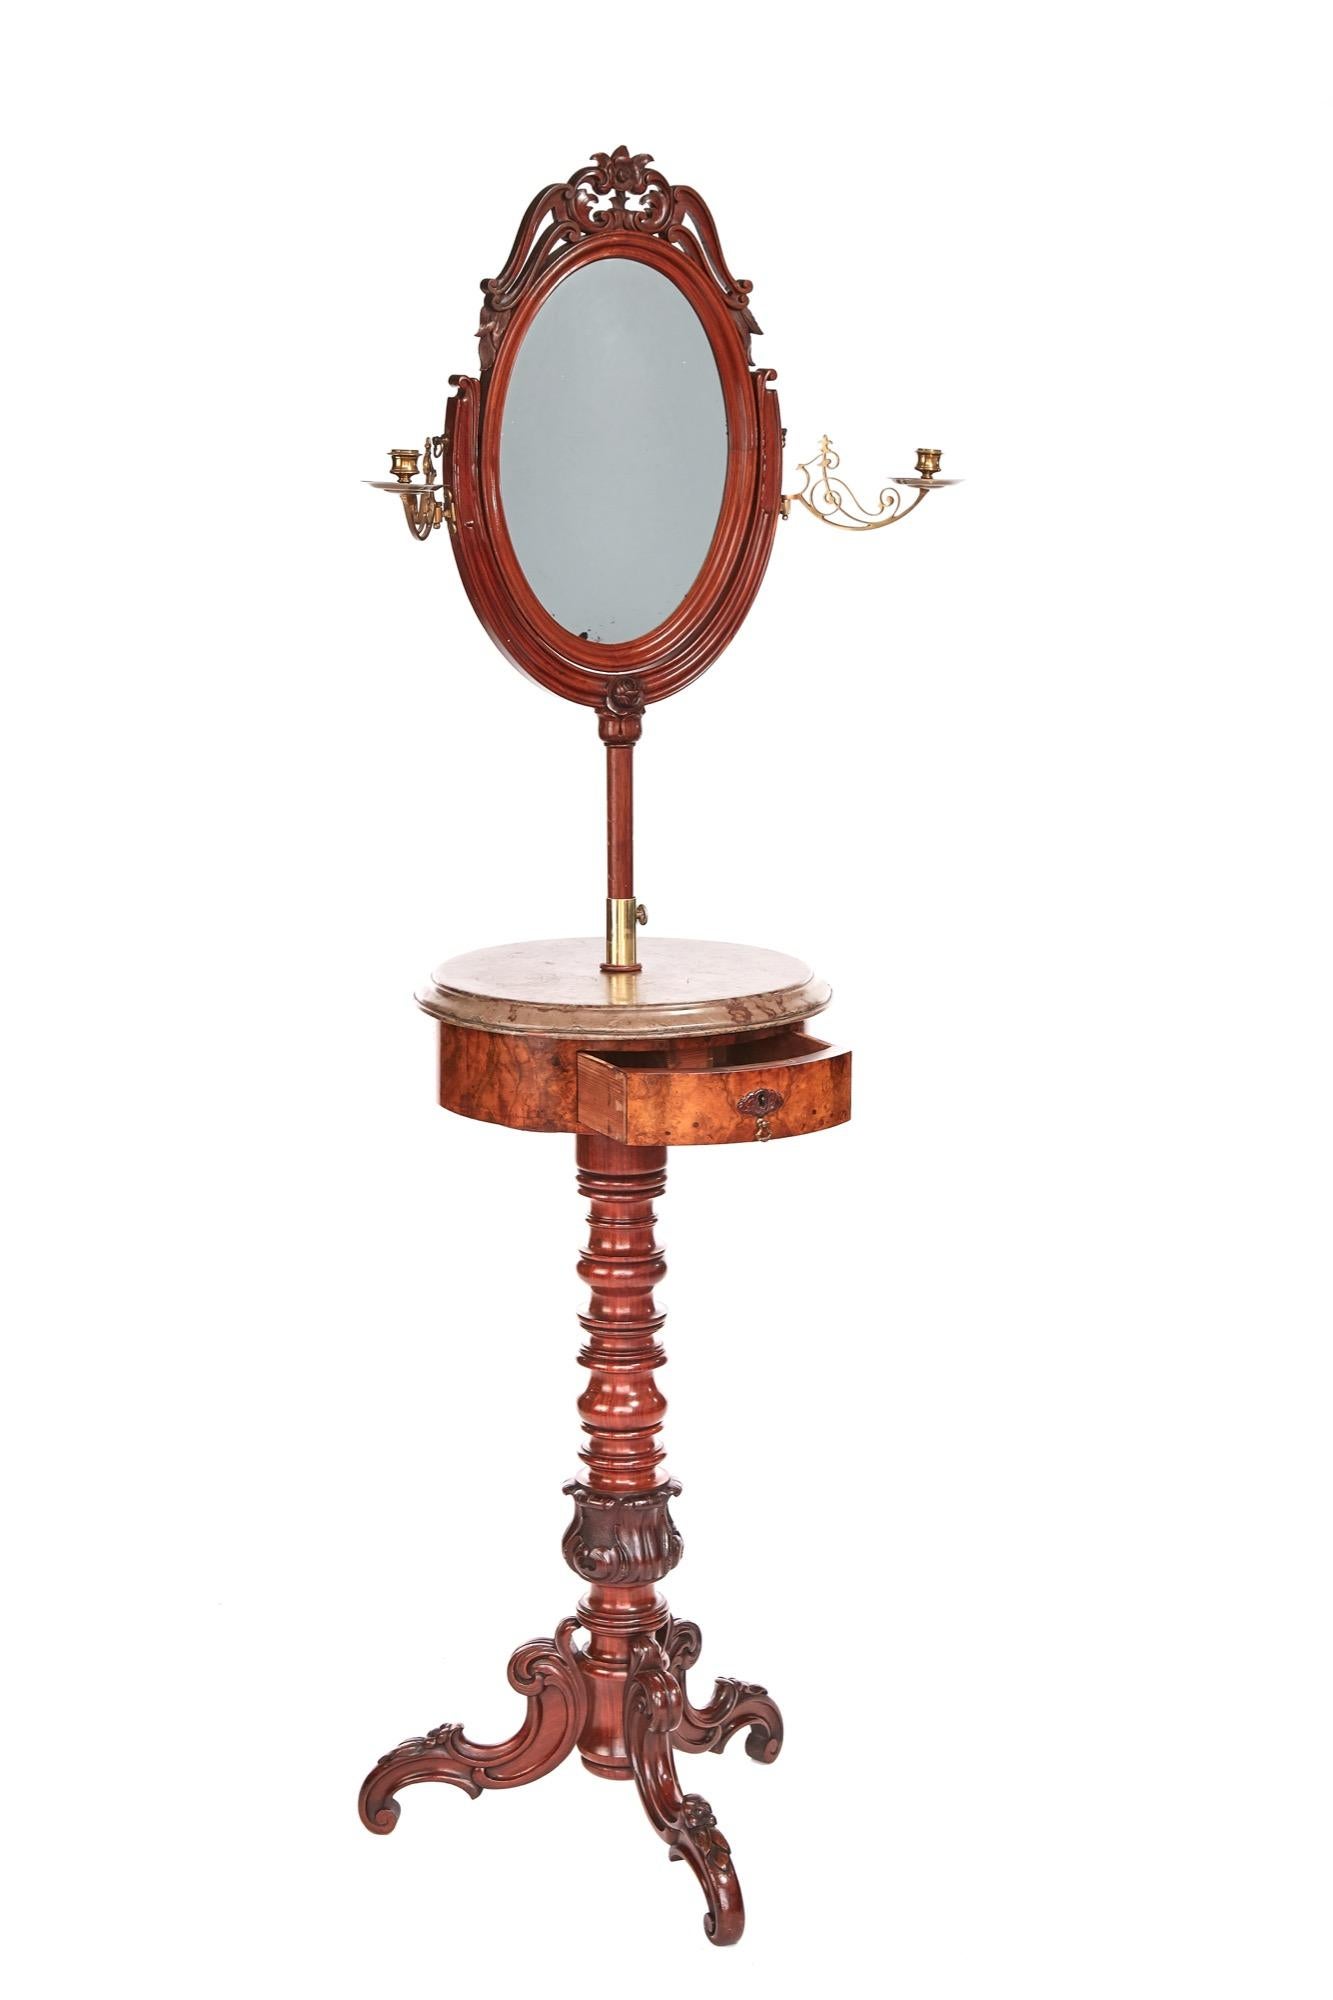 Fine quality Victorian mahogany and walnut telescopic dressing stand with a stunning oval mahogany framed swing mirror with ornate carving to the top. It is supported on a U-shaped elegant telescopic frame with brass candle sconces each side and a